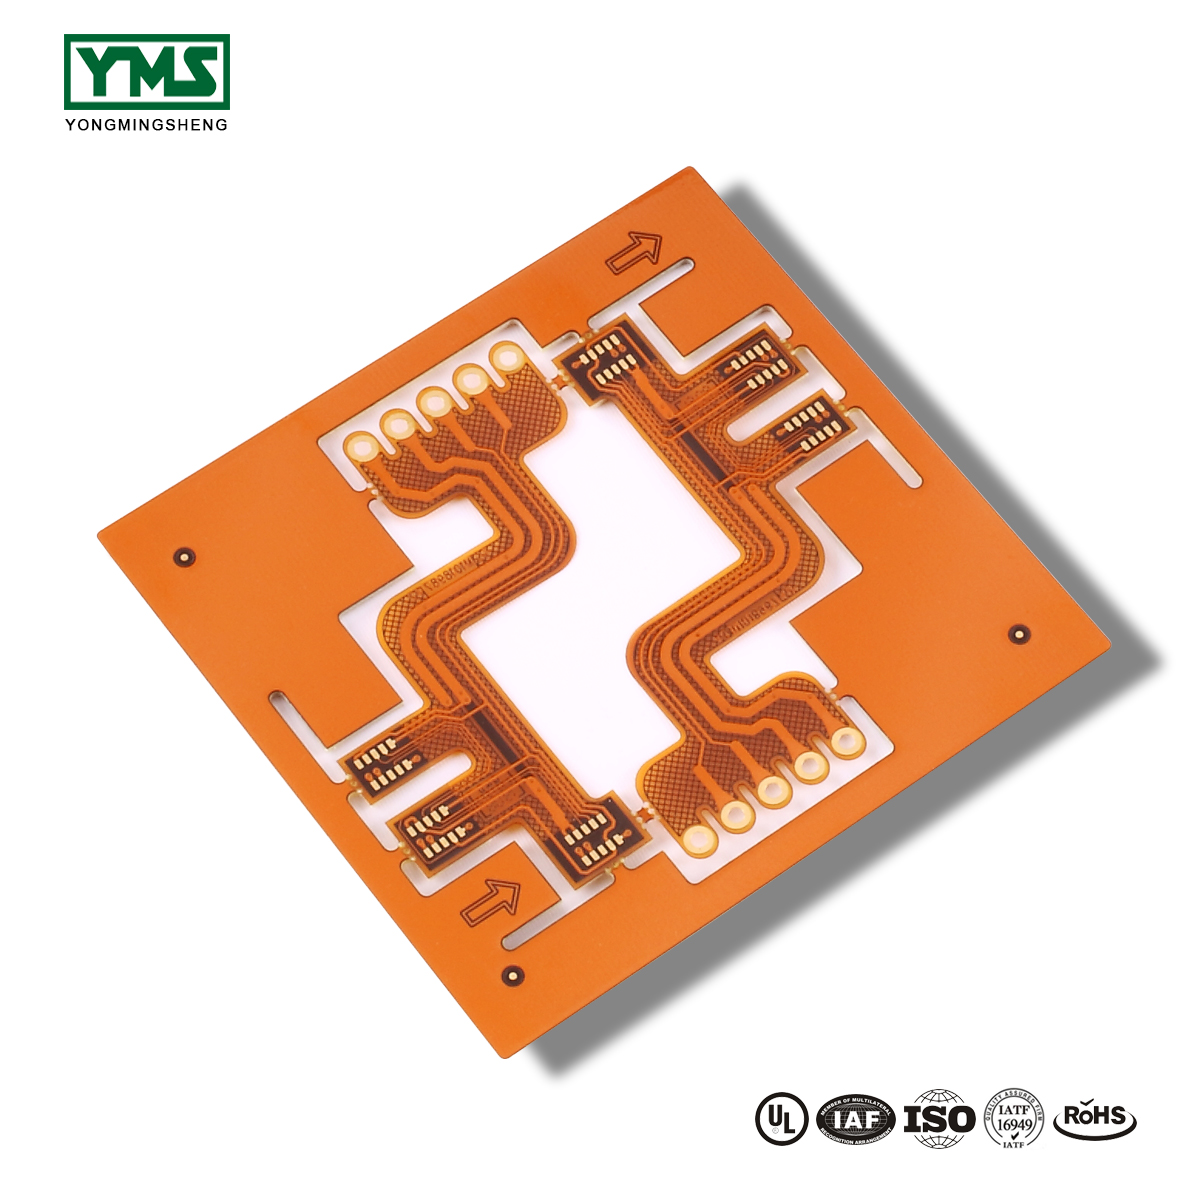 China Gold Supplier for 94v0 Bare Printed Circuit Board - 4Layer Immersion Gold FPC | YMS PPCB – Yongmingsheng